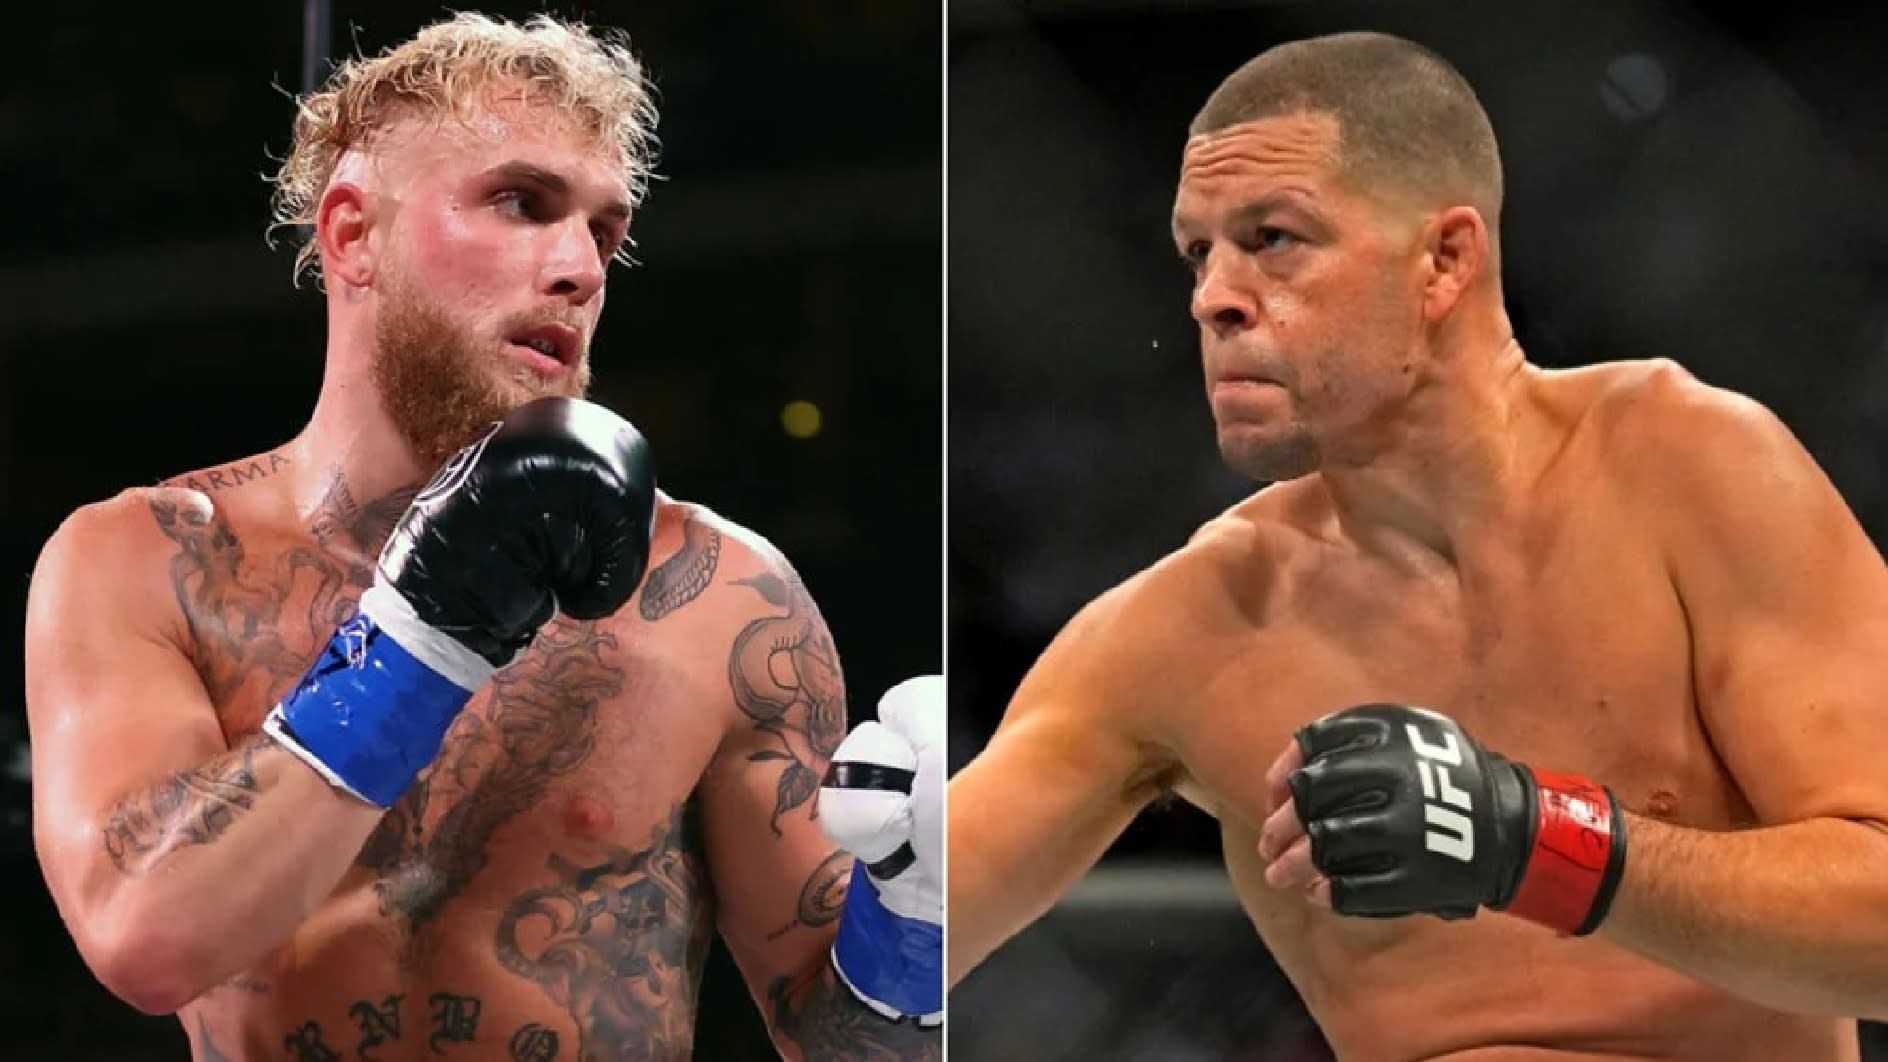 Jake Paul vs. Nate Diaz: Preview, Where to Watch and Betting Odds